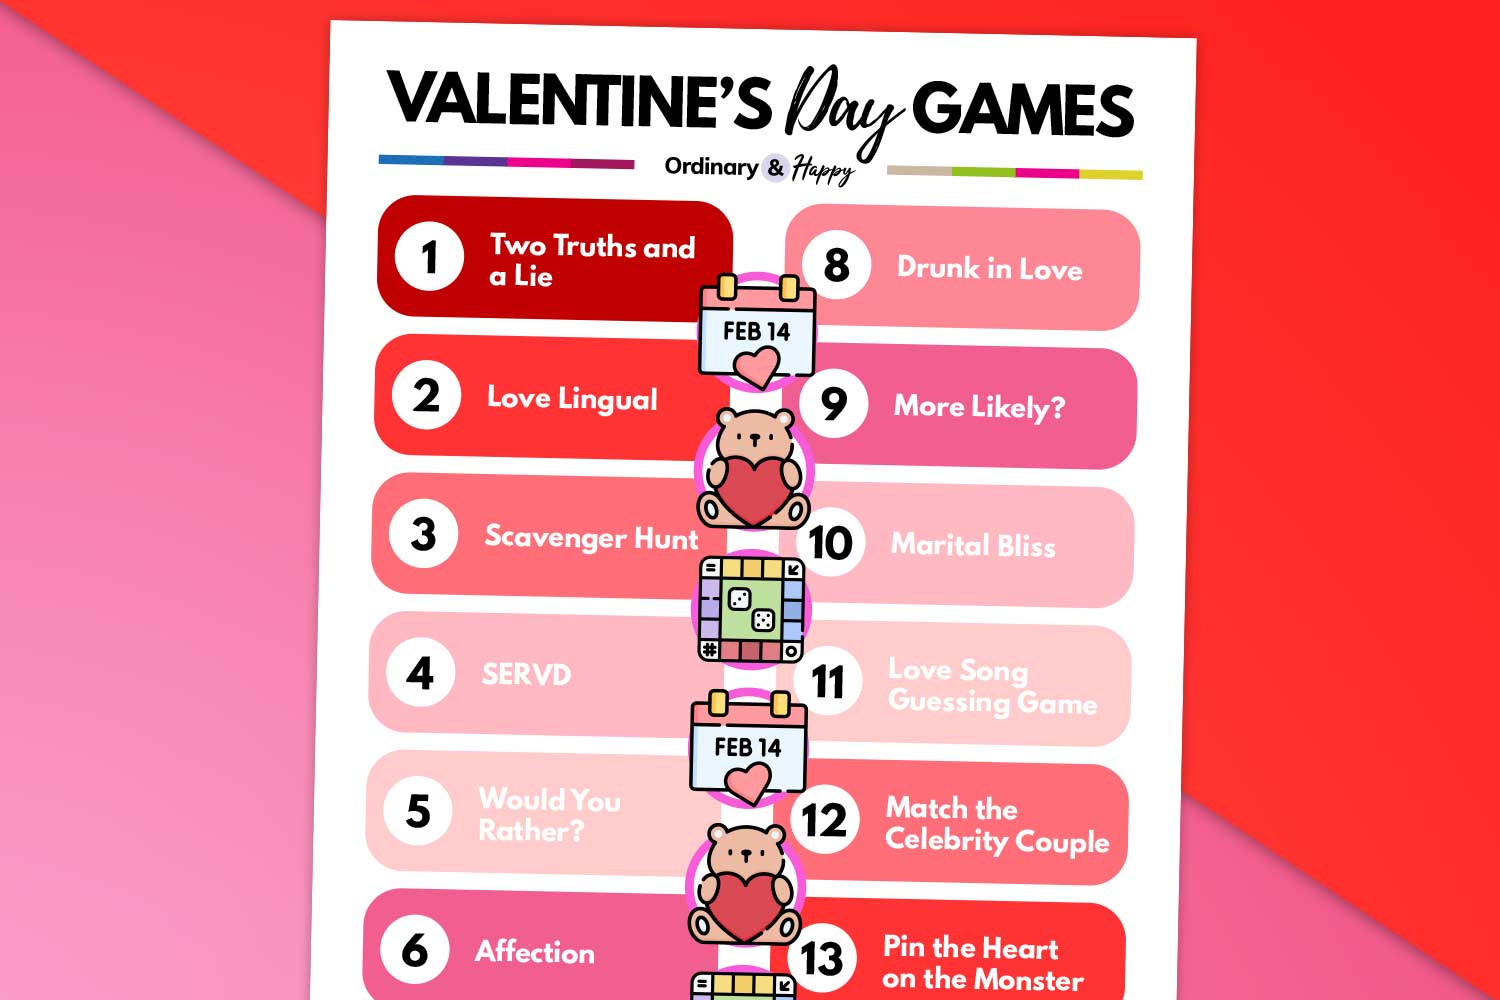 25 Valentine’s Day Games to Play with the Ones You Love